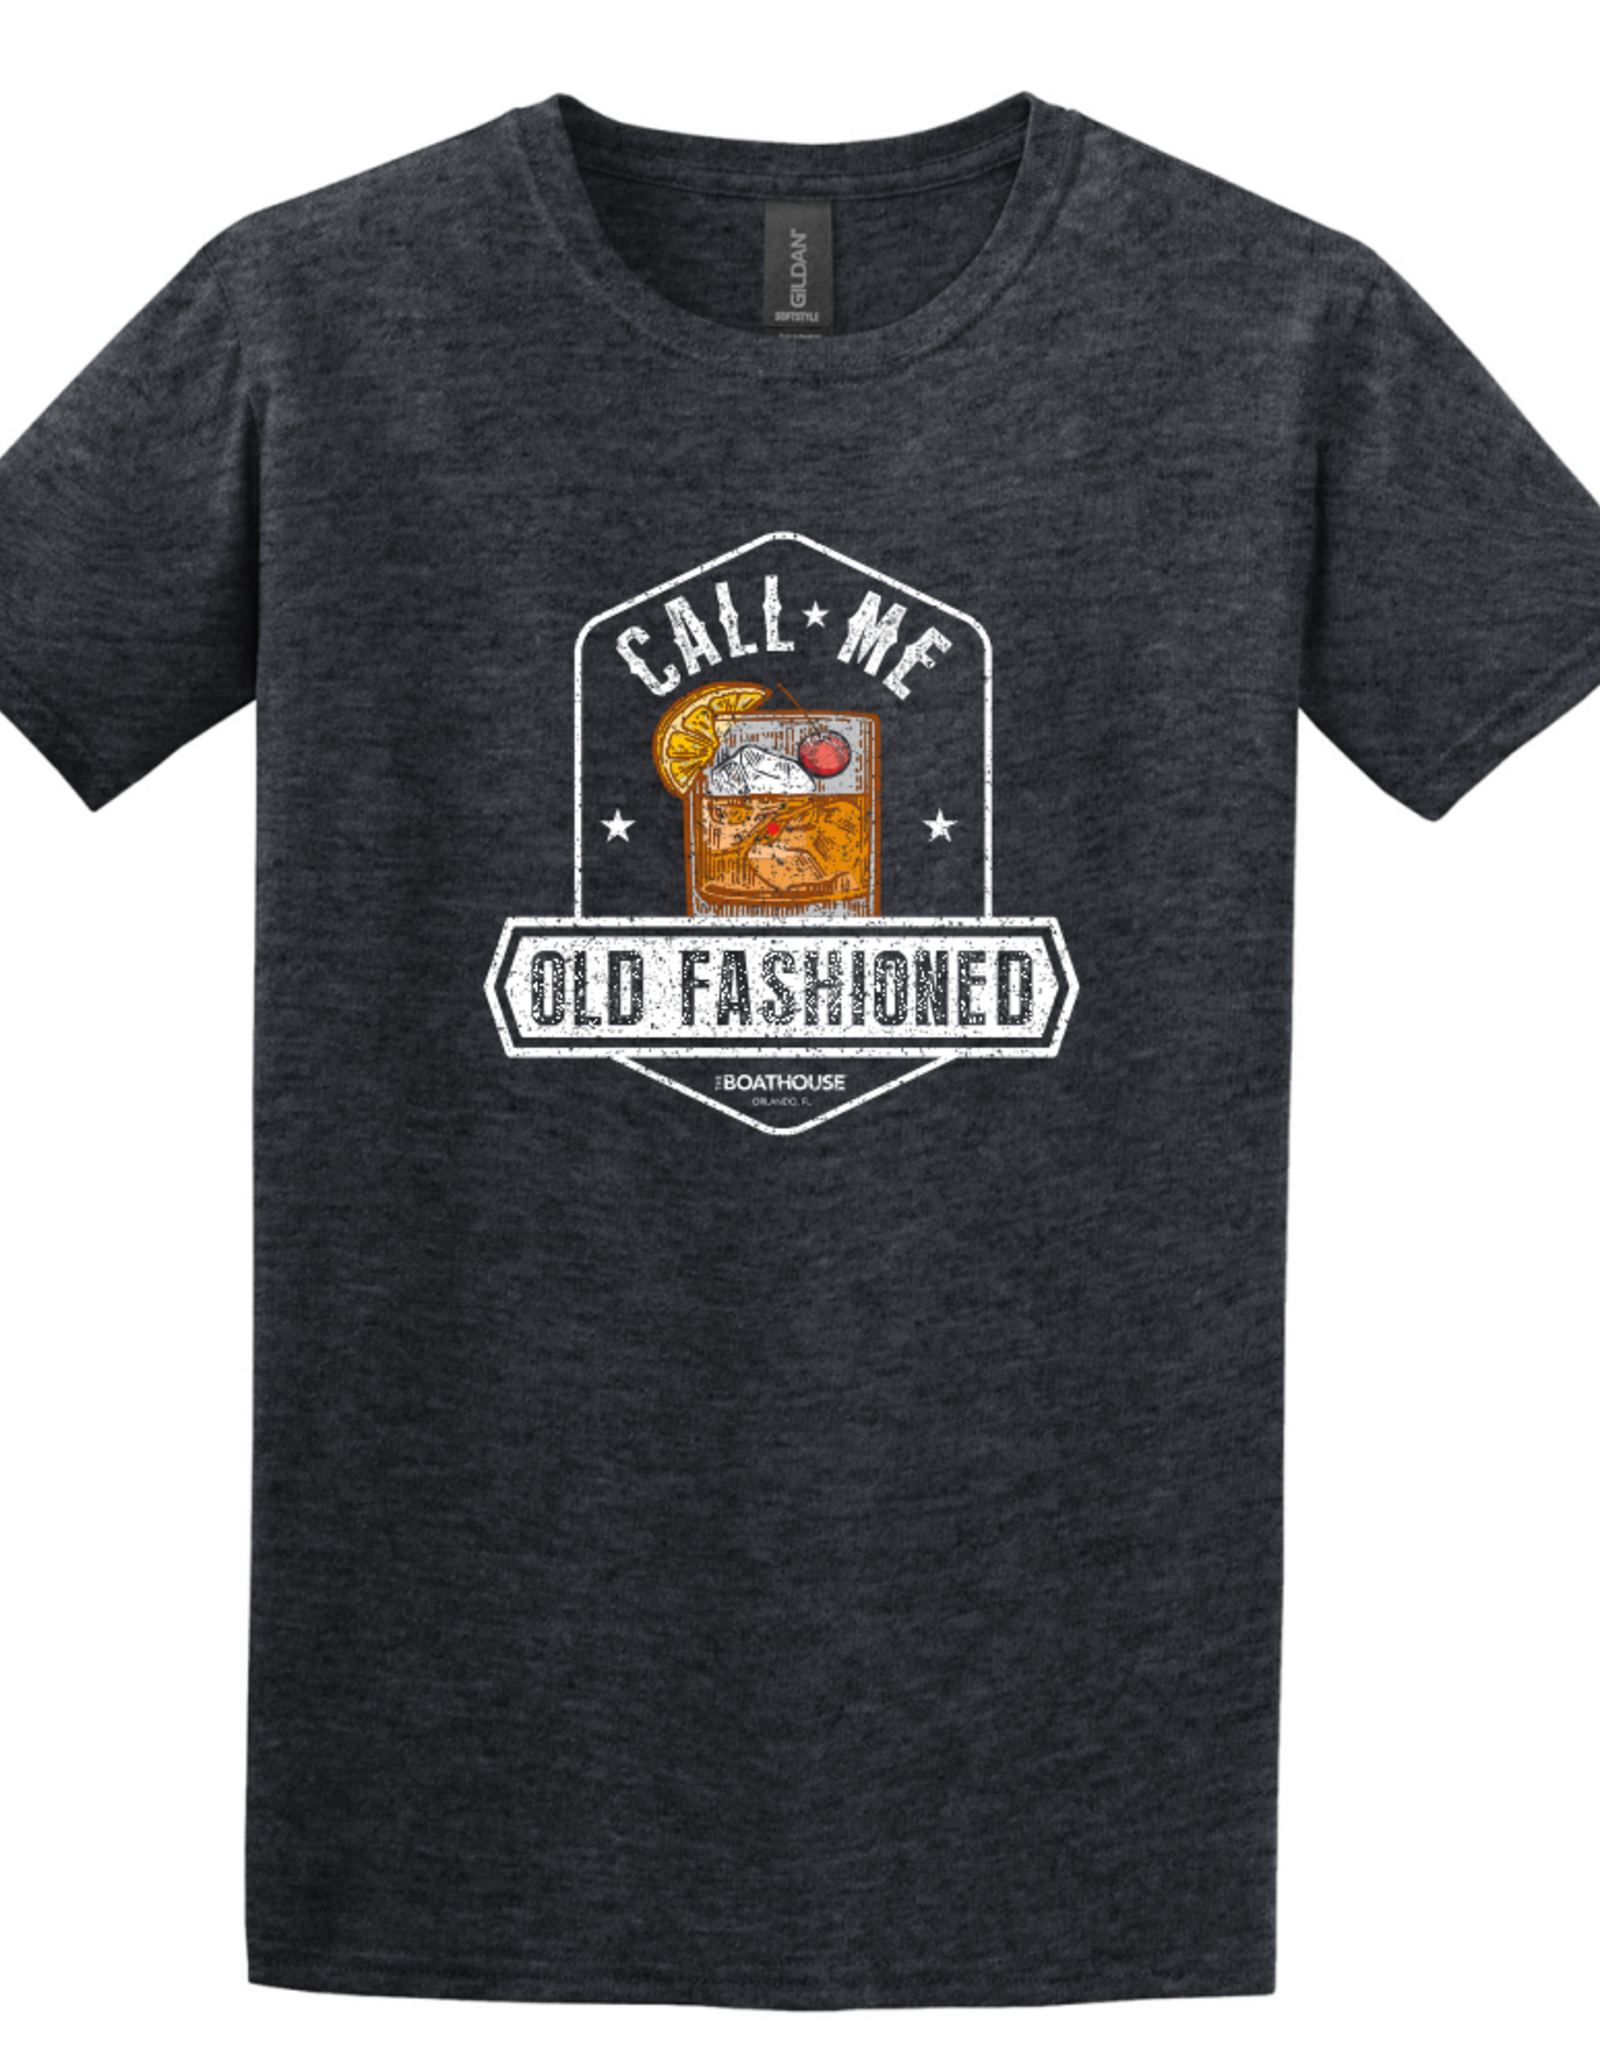 BH NEW OLD FASHIONED SS Tee